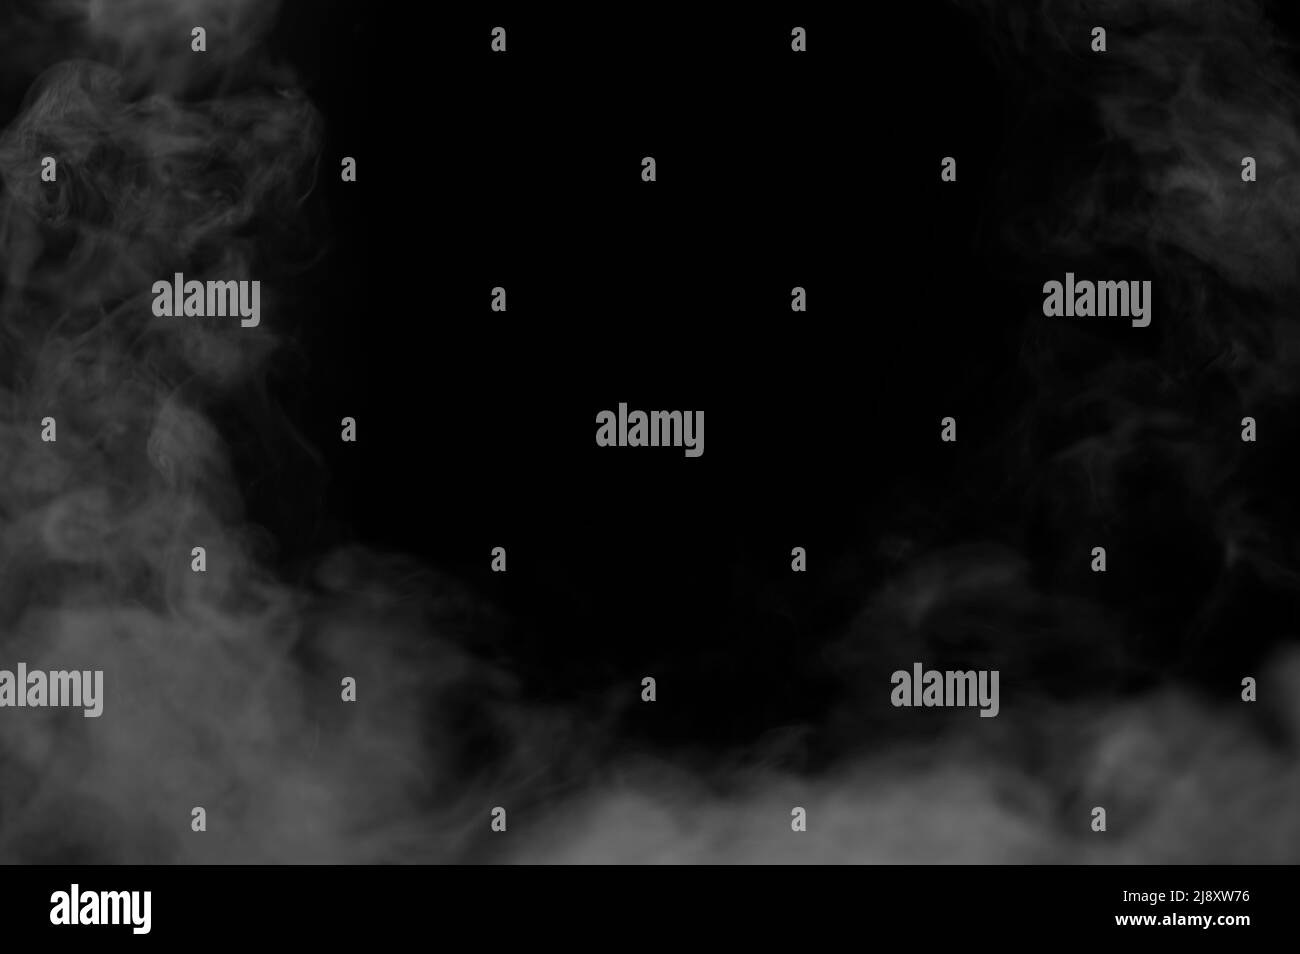 blurred smoke on black background realistic smoke on floor for overlay different projects design background for promo, trailer, titles, text, opener Stock Photo